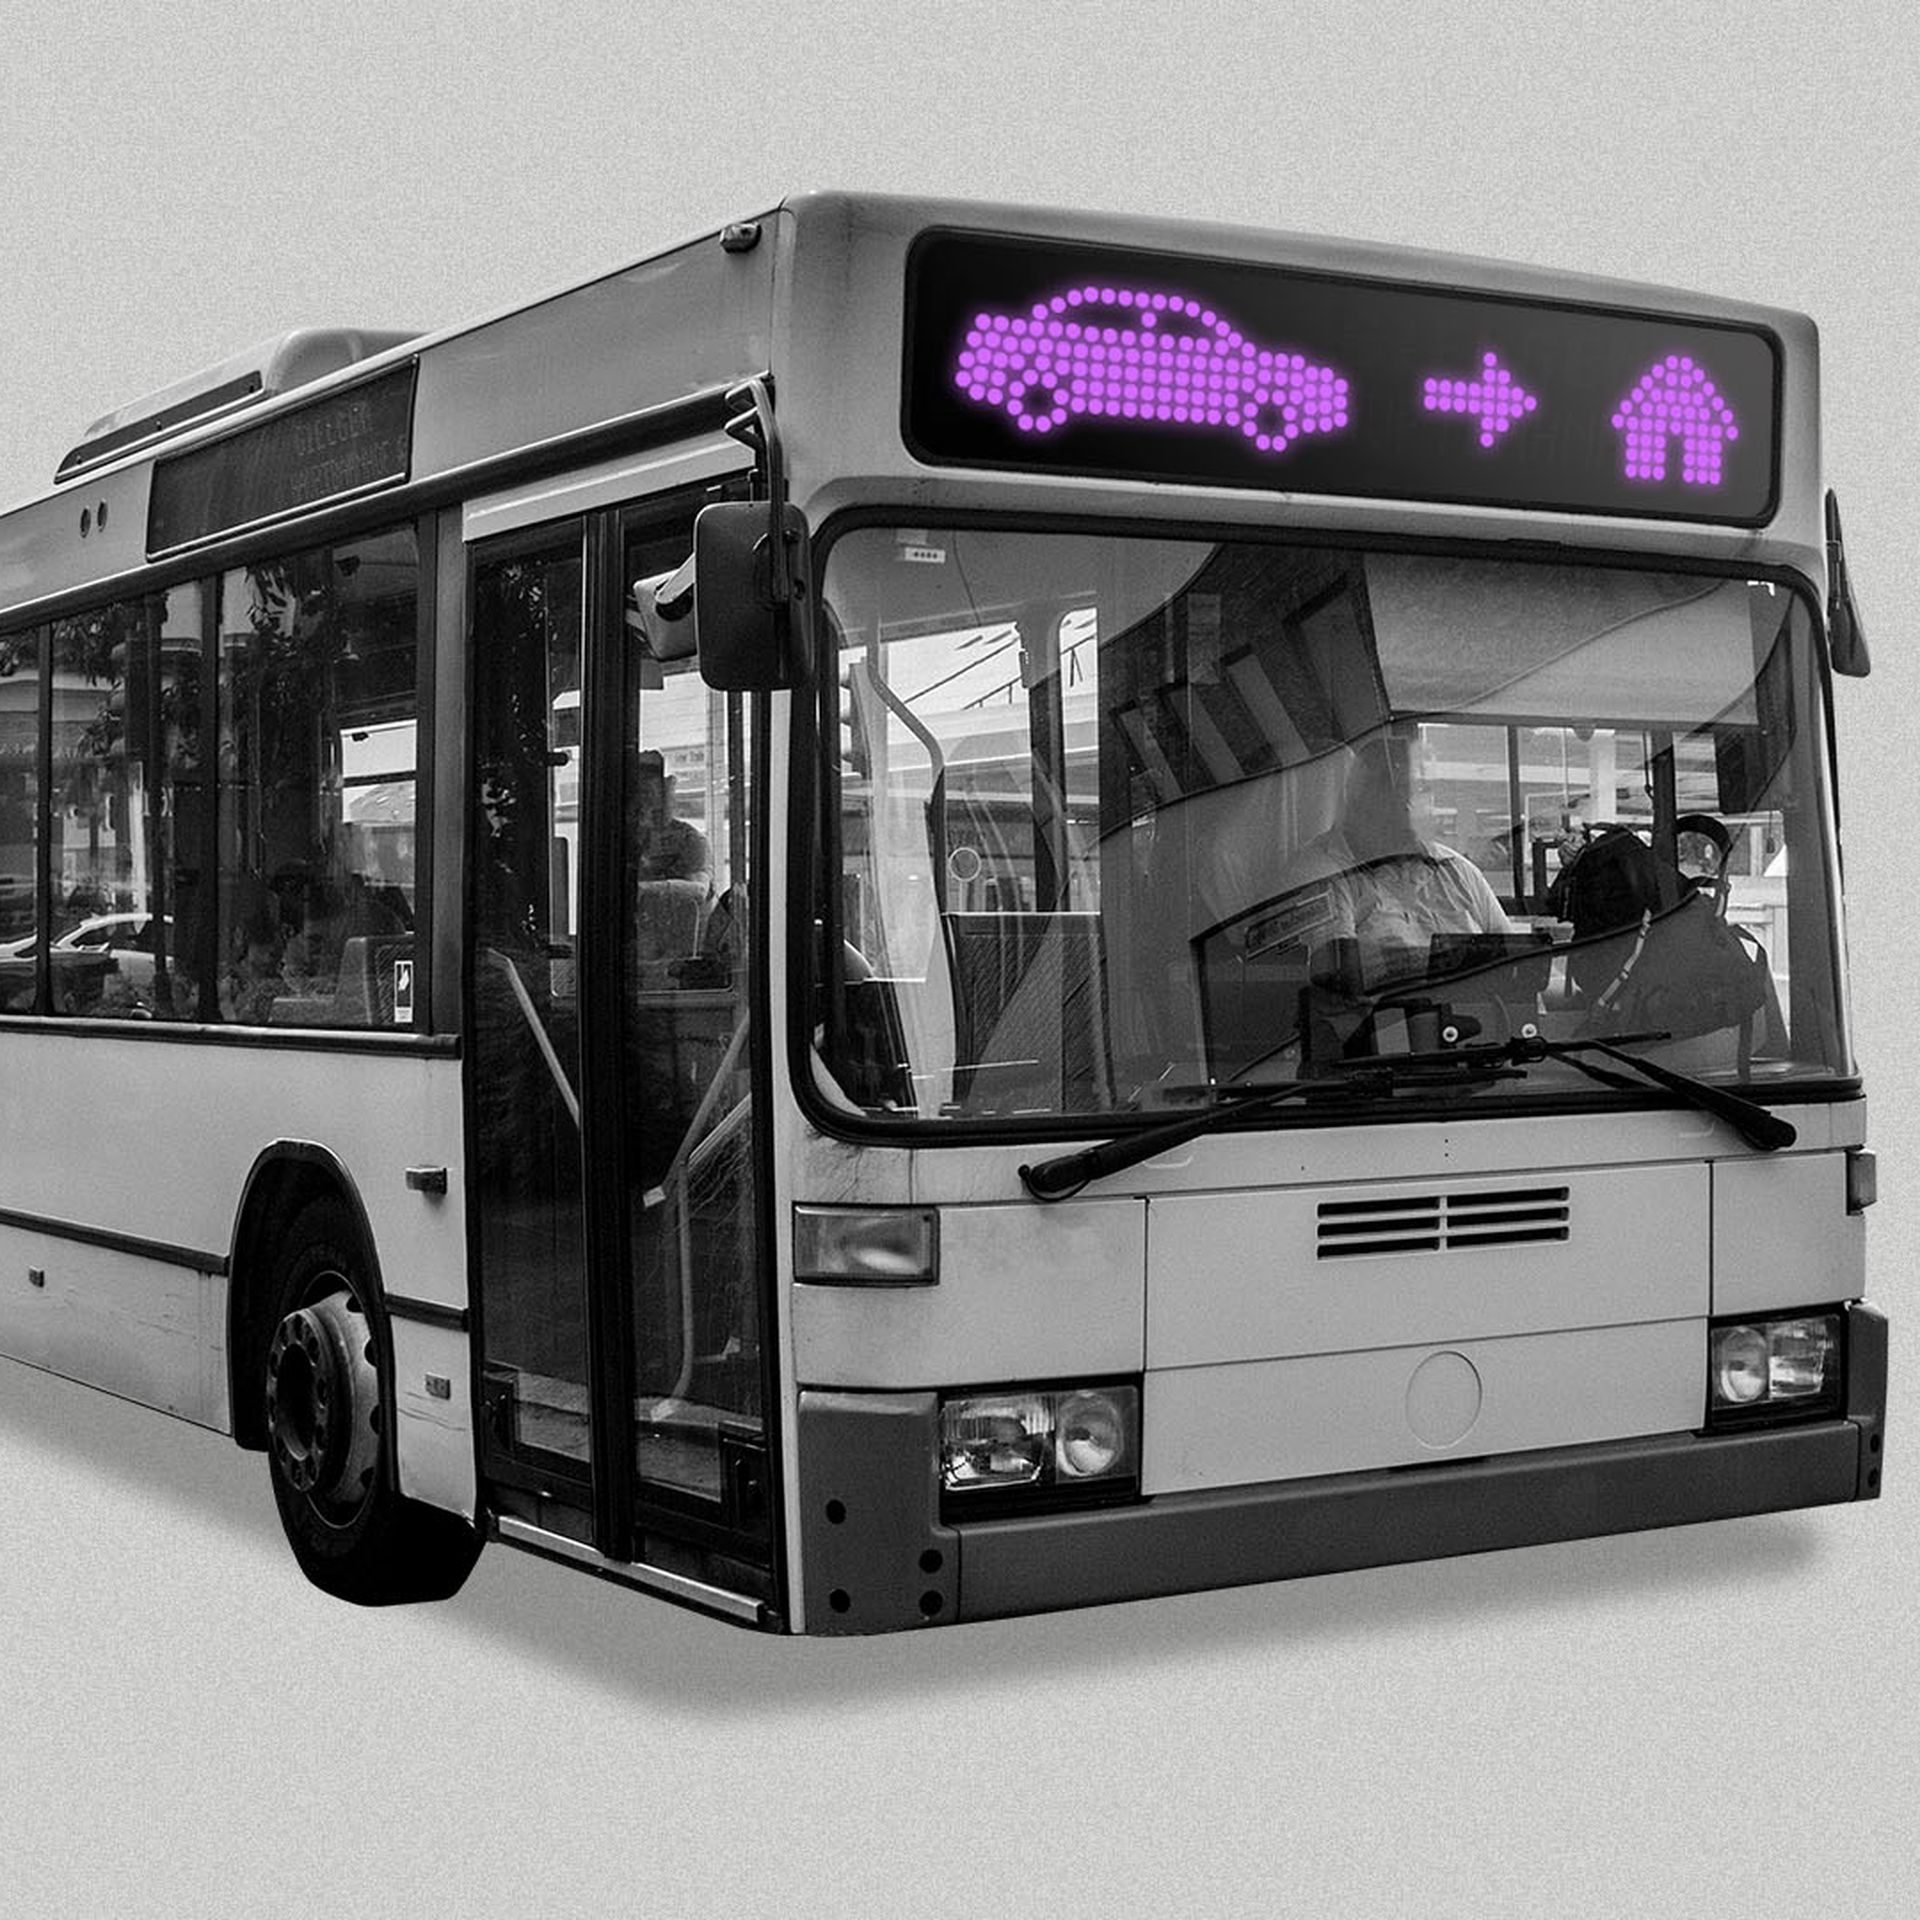 Illustration of a bus with a route marque that includes a car, an arrow, and a destination